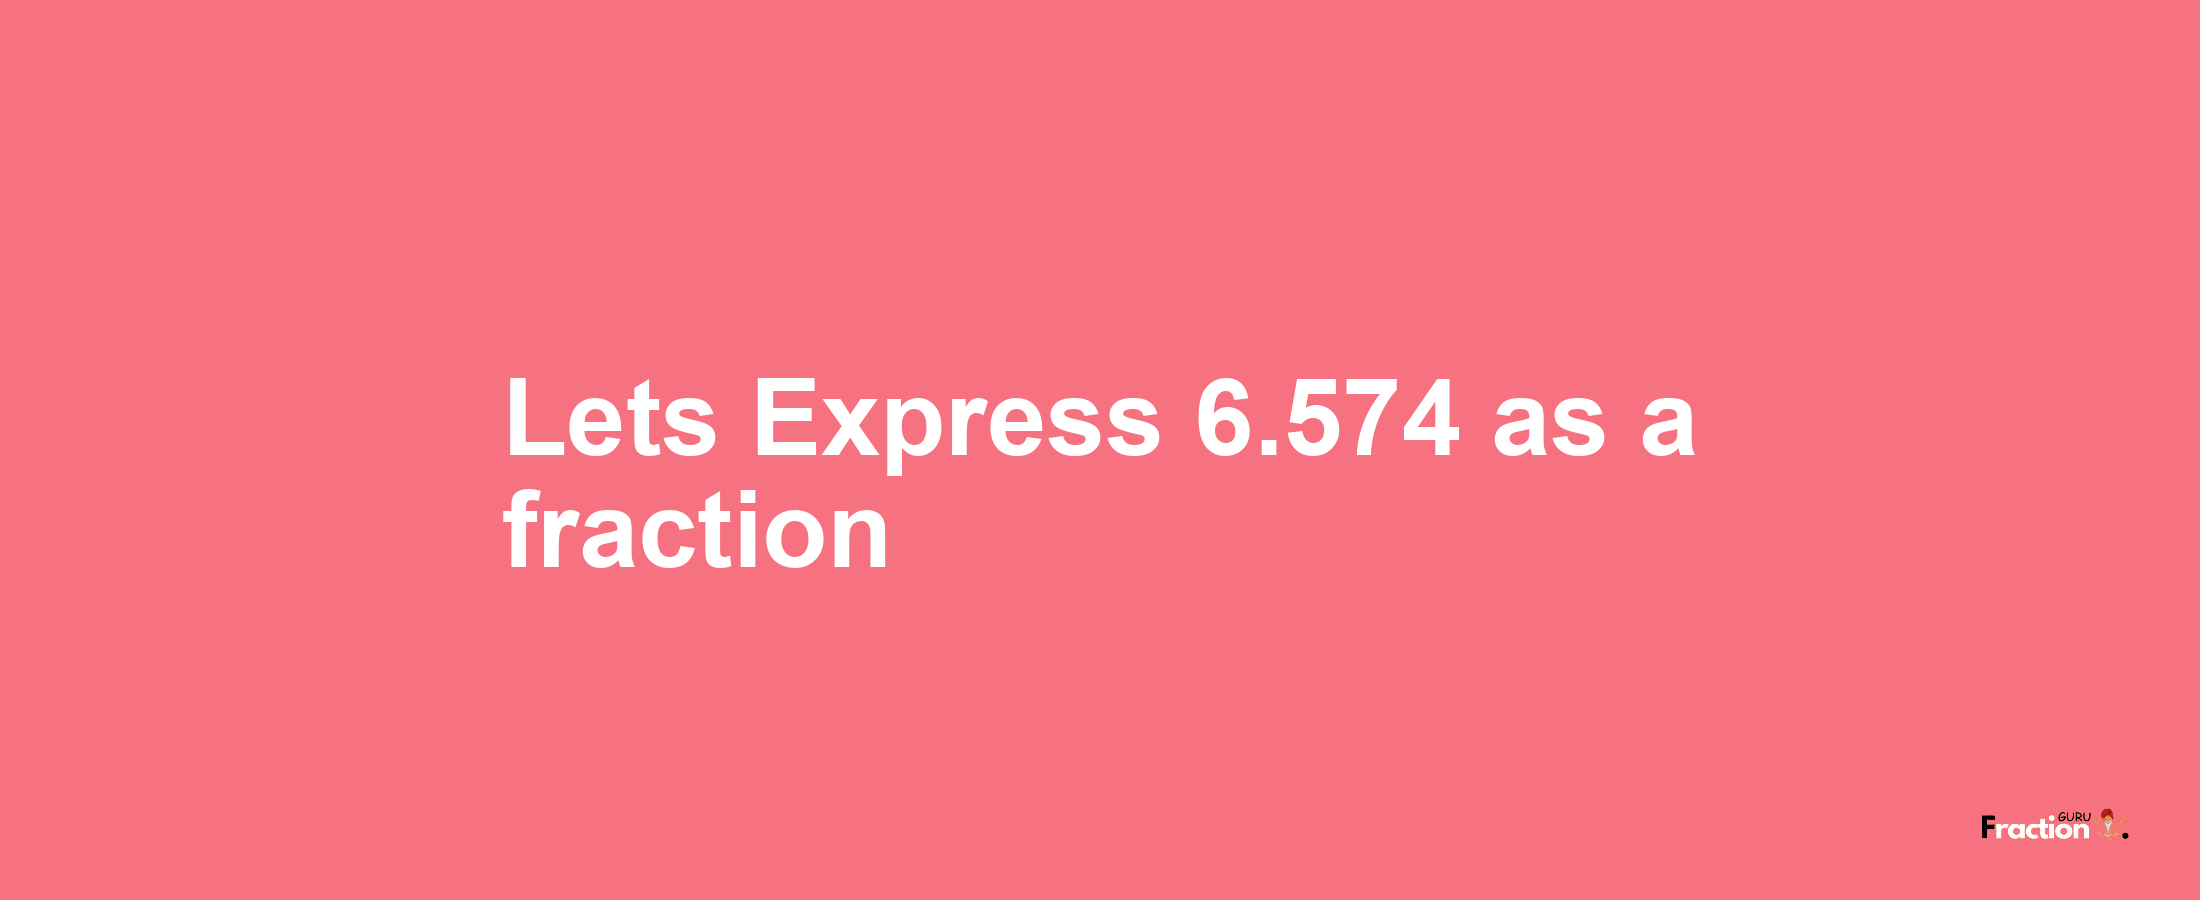 Lets Express 6.574 as afraction